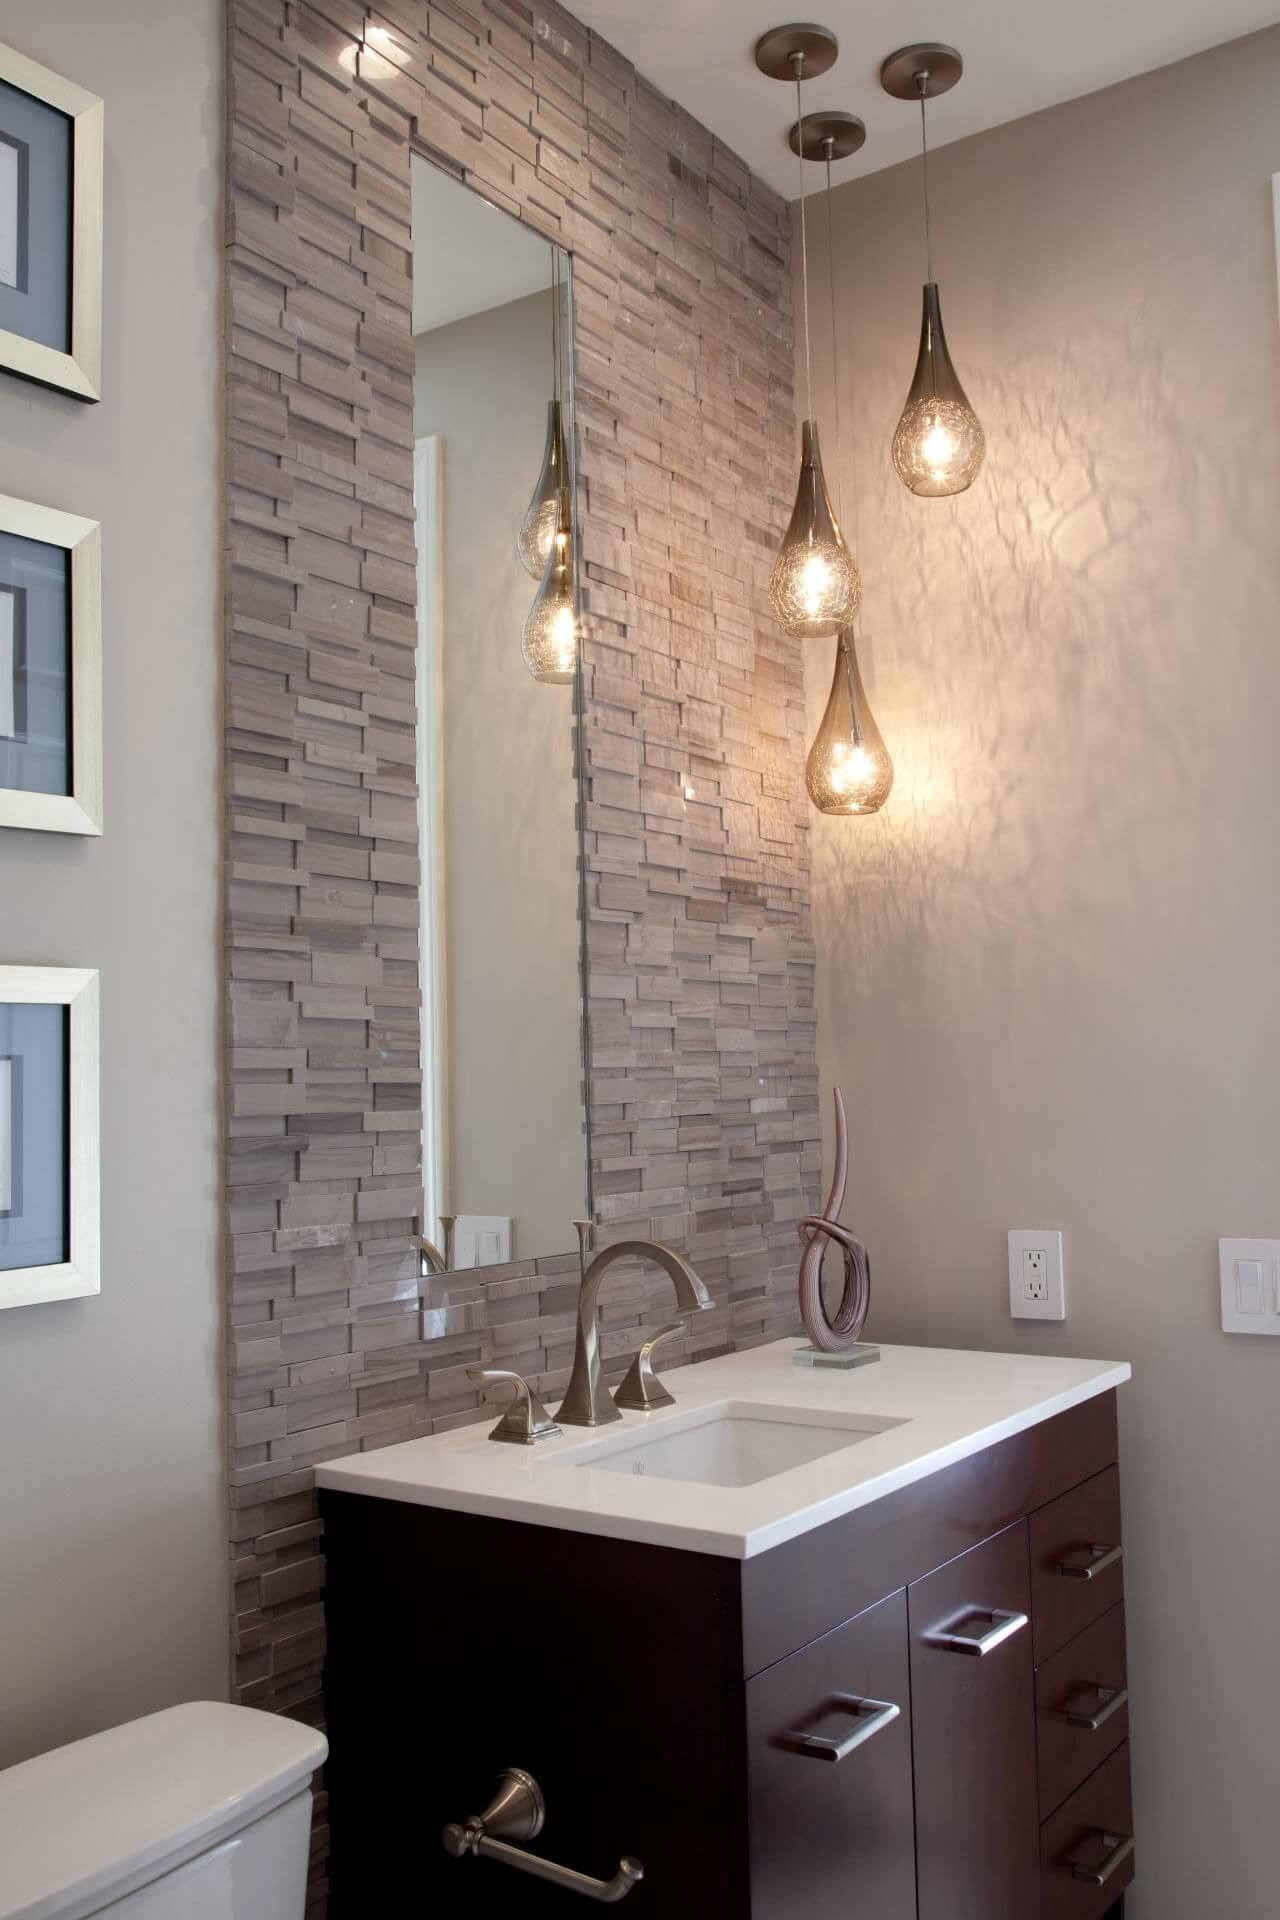 Use Lighting to Increase Space in a Small Bathroom | Easy Ways to Make a Small Bathroom Look Larger | FarmFoodFamily.com